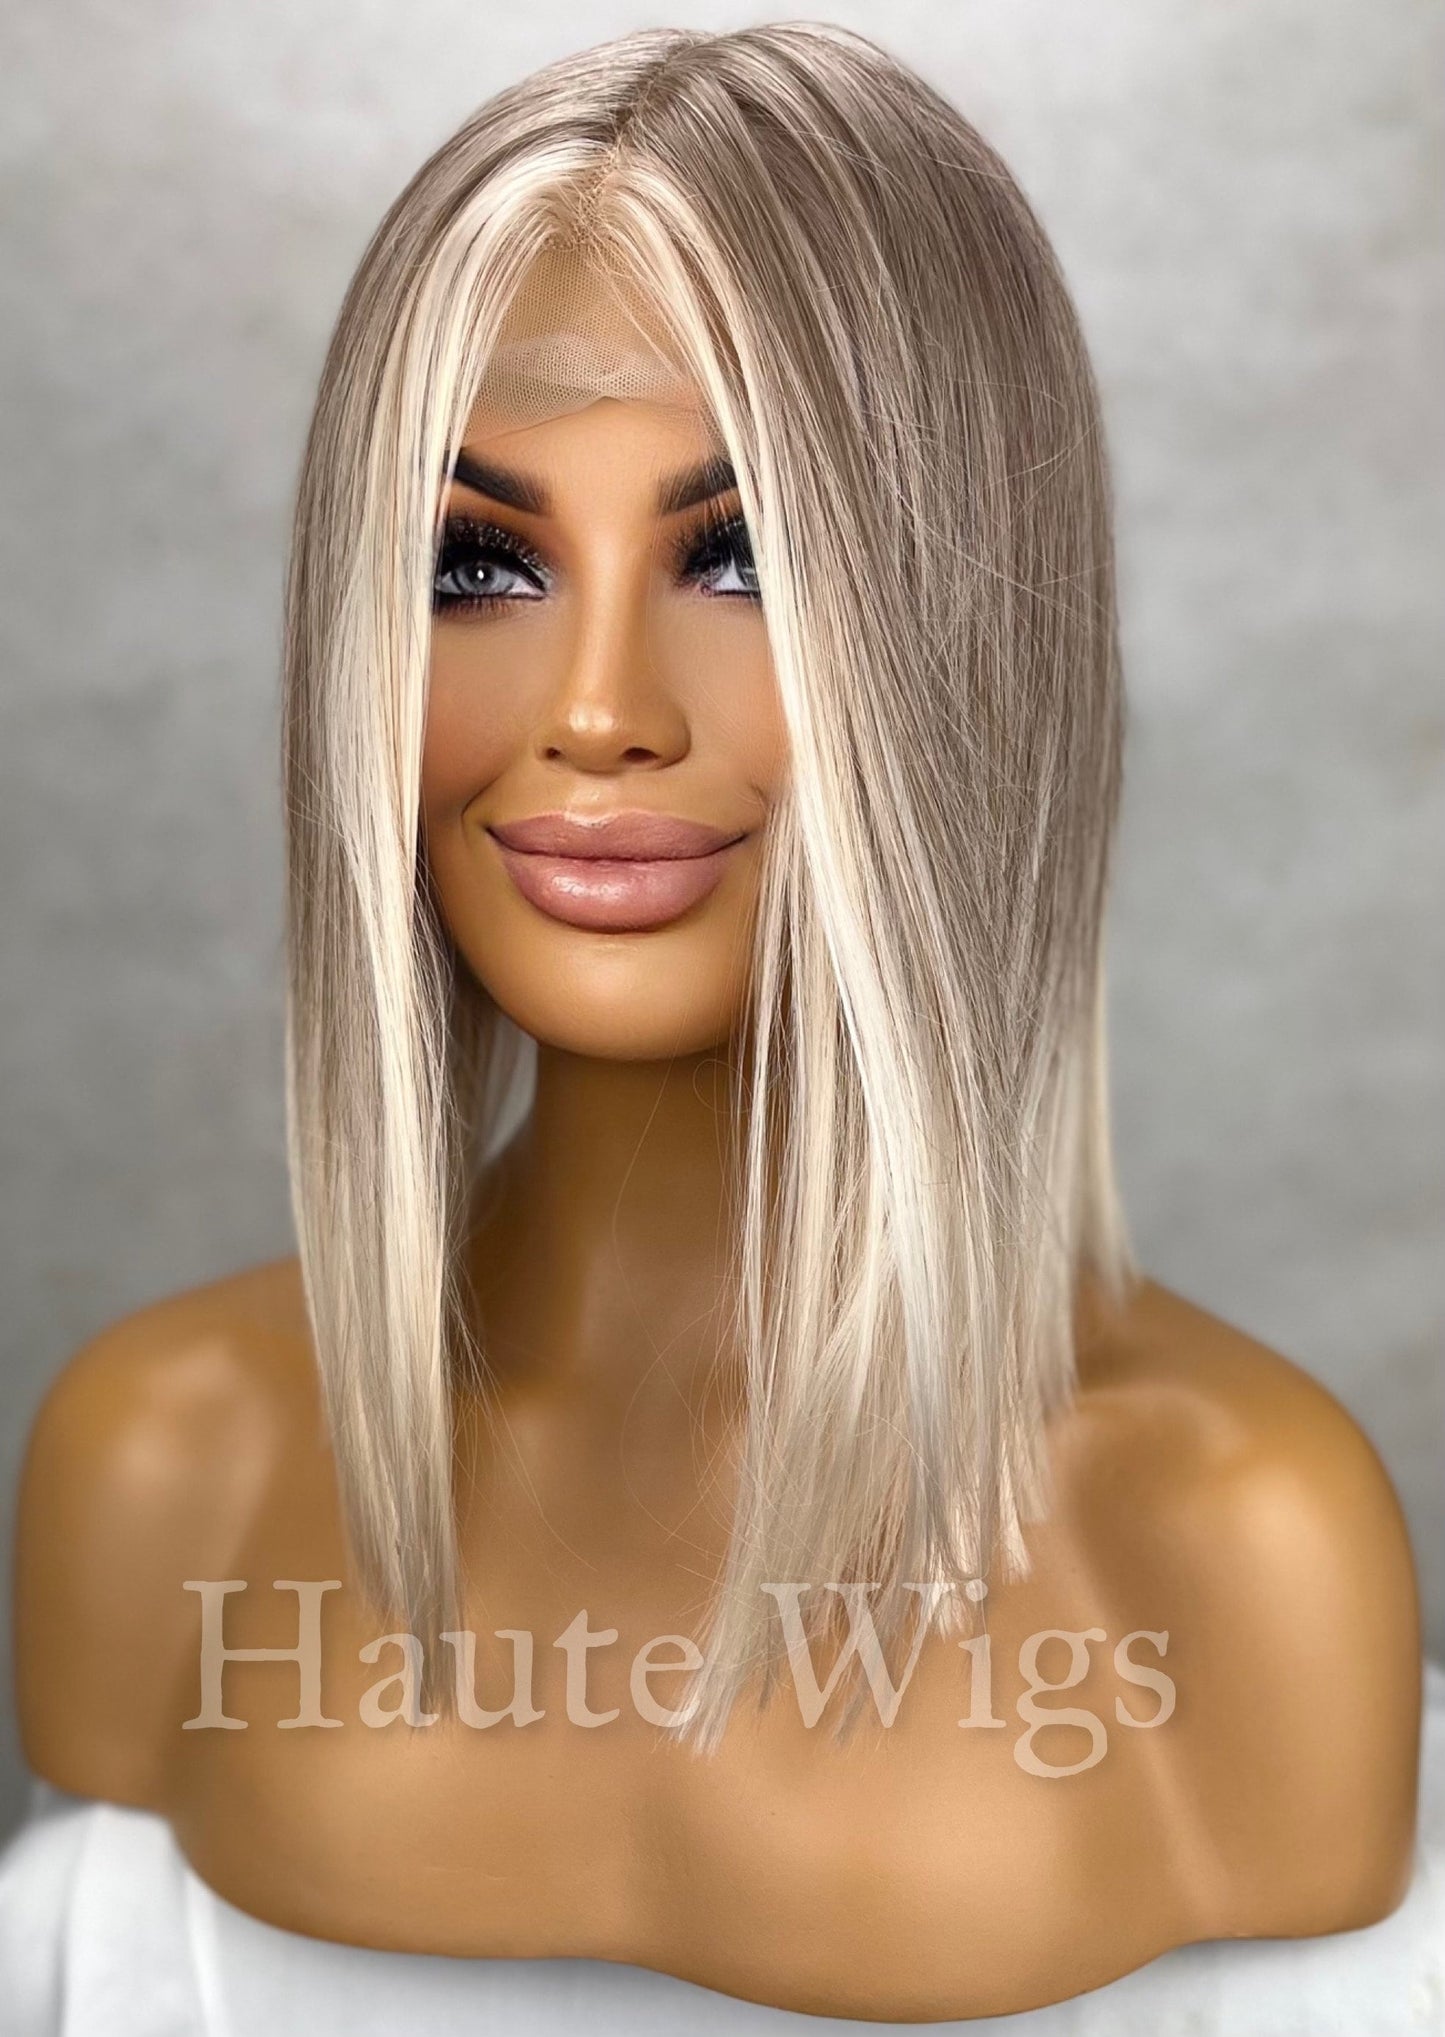 Californian Girl - Ash Blonde White Balayage Highlights BOB streaks 14 inch Wig Straight Center Parting Low Density Lace Front Haute wigs